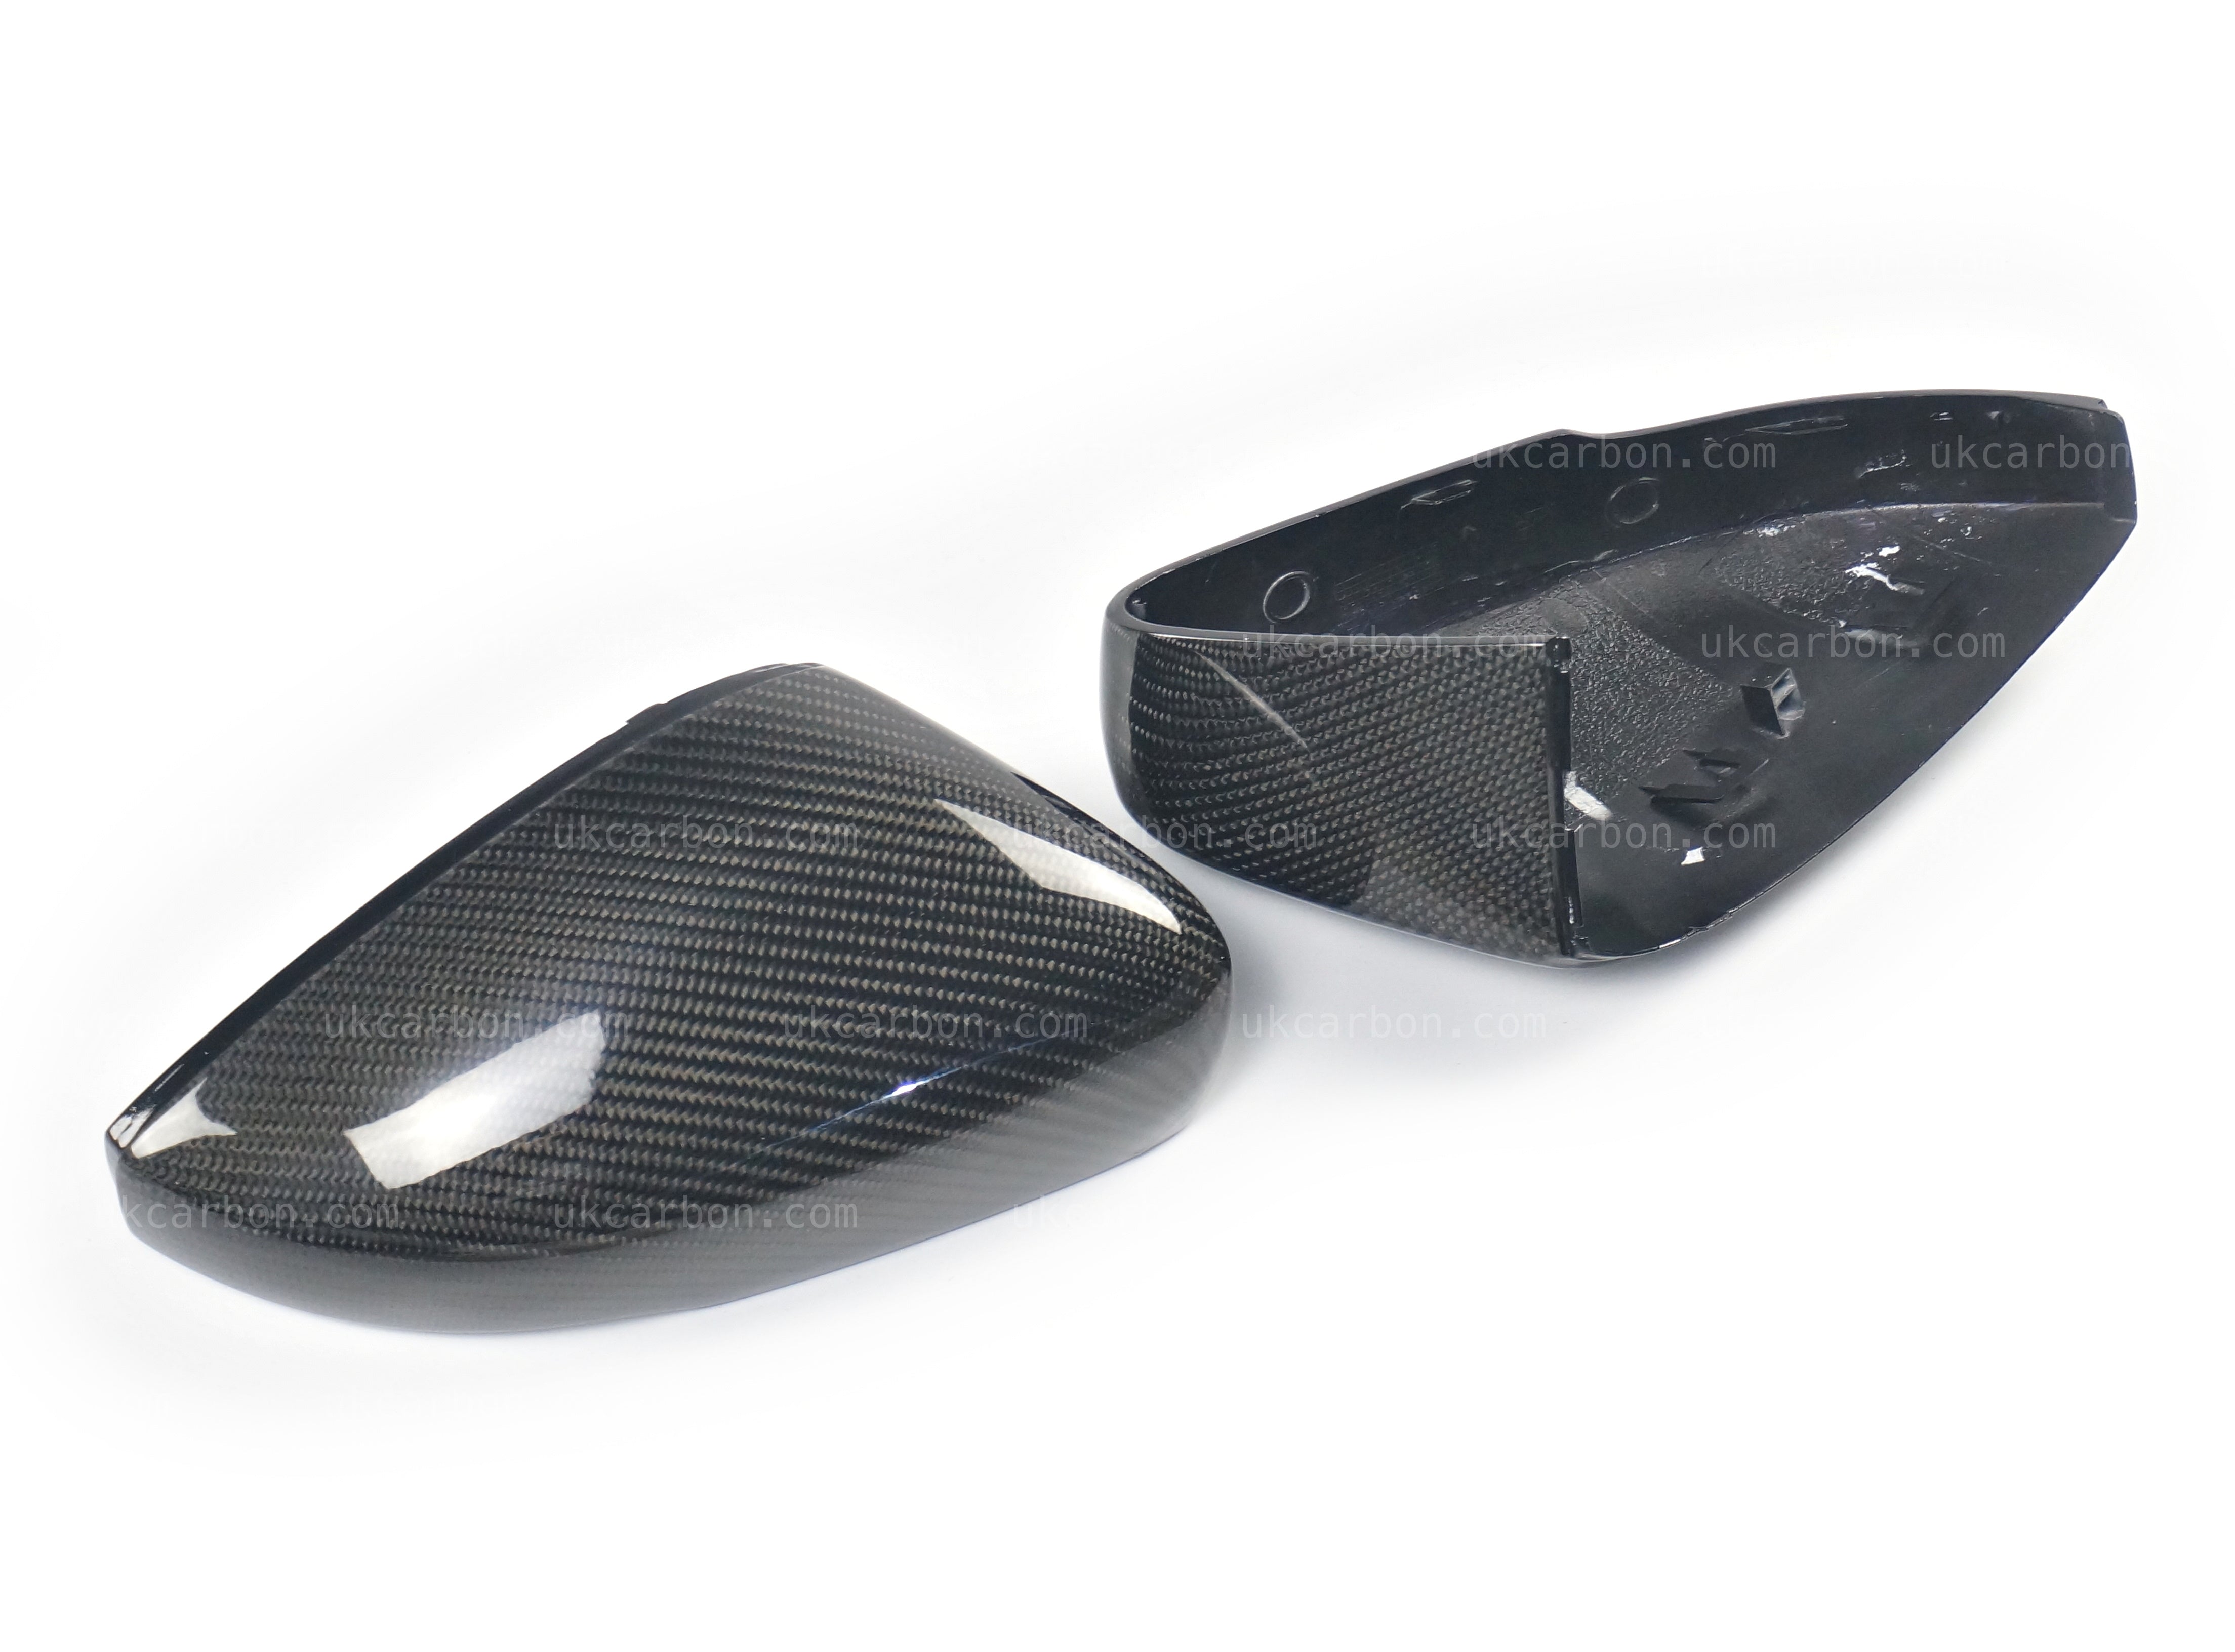 Volkswagen VW Polo Carbon Fibre Wing Mirror Cover Replacements 6R 6C by UKCarbon